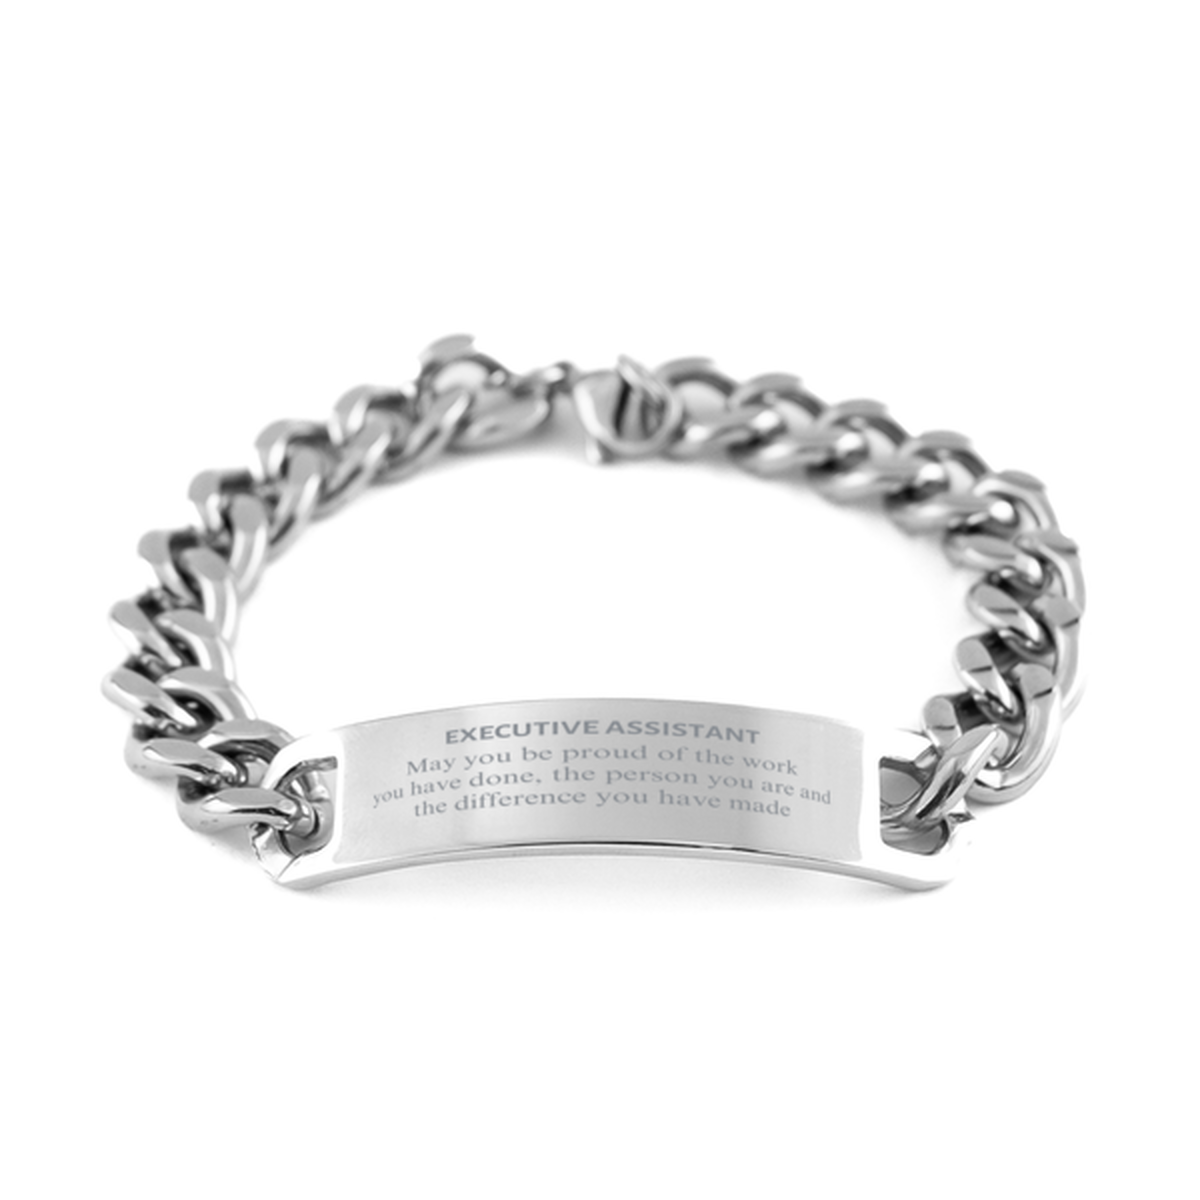 Executive Assistant May you be proud of the work you have done, Retirement Executive Assistant Cuban Chain Stainless Steel Bracelet for Colleague Appreciation Gifts Amazing for Executive Assistant